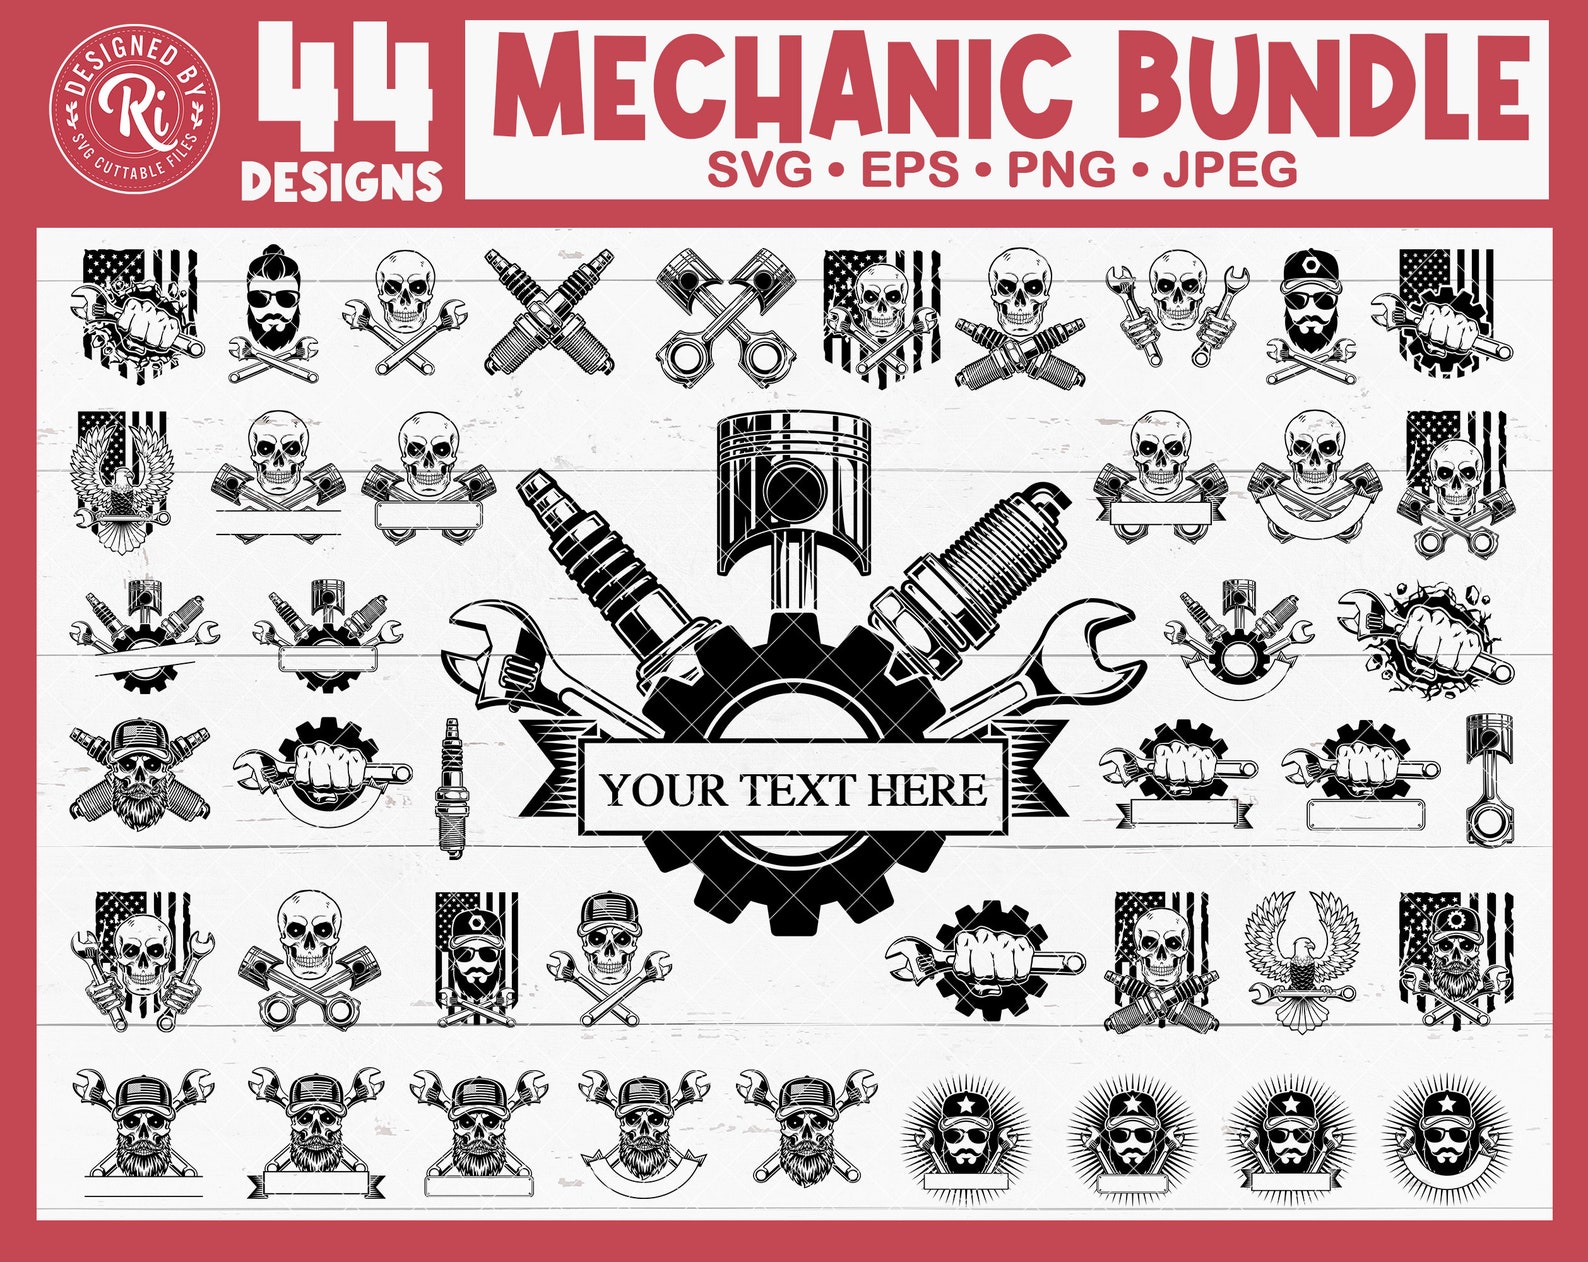 Cover image of Mechanic Svg.